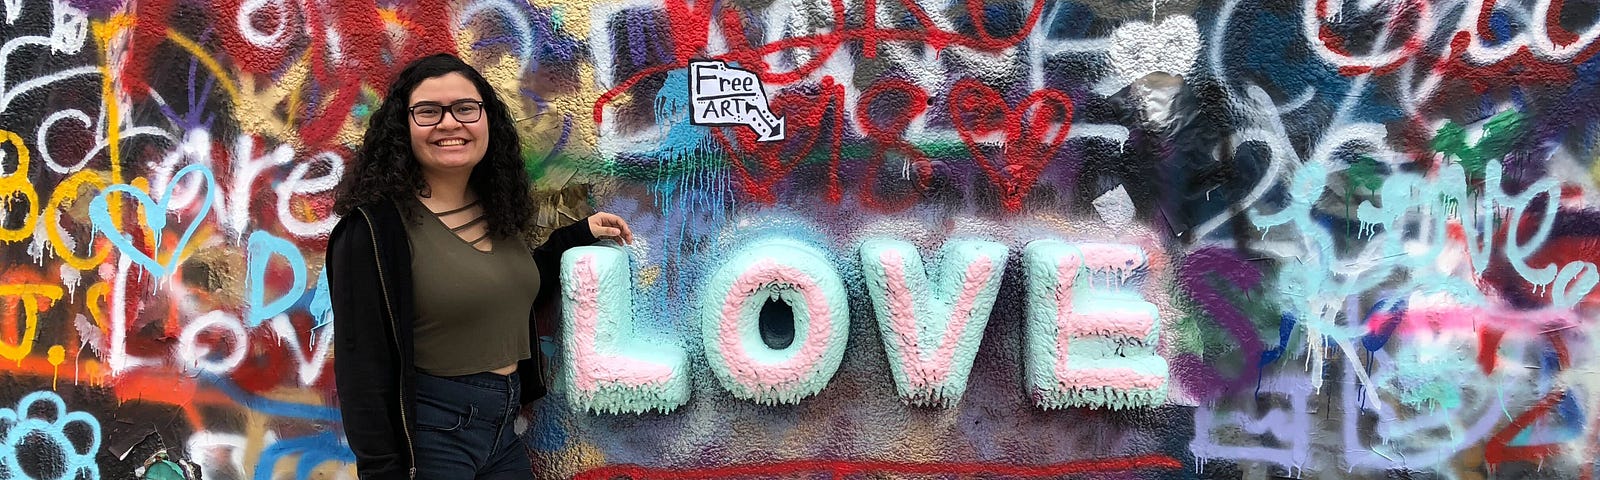 Miriam, the writer of this blog post, is posing next to a wall of graffiti art, specifically in front of a large 3D piece of art that says, “LOVE”